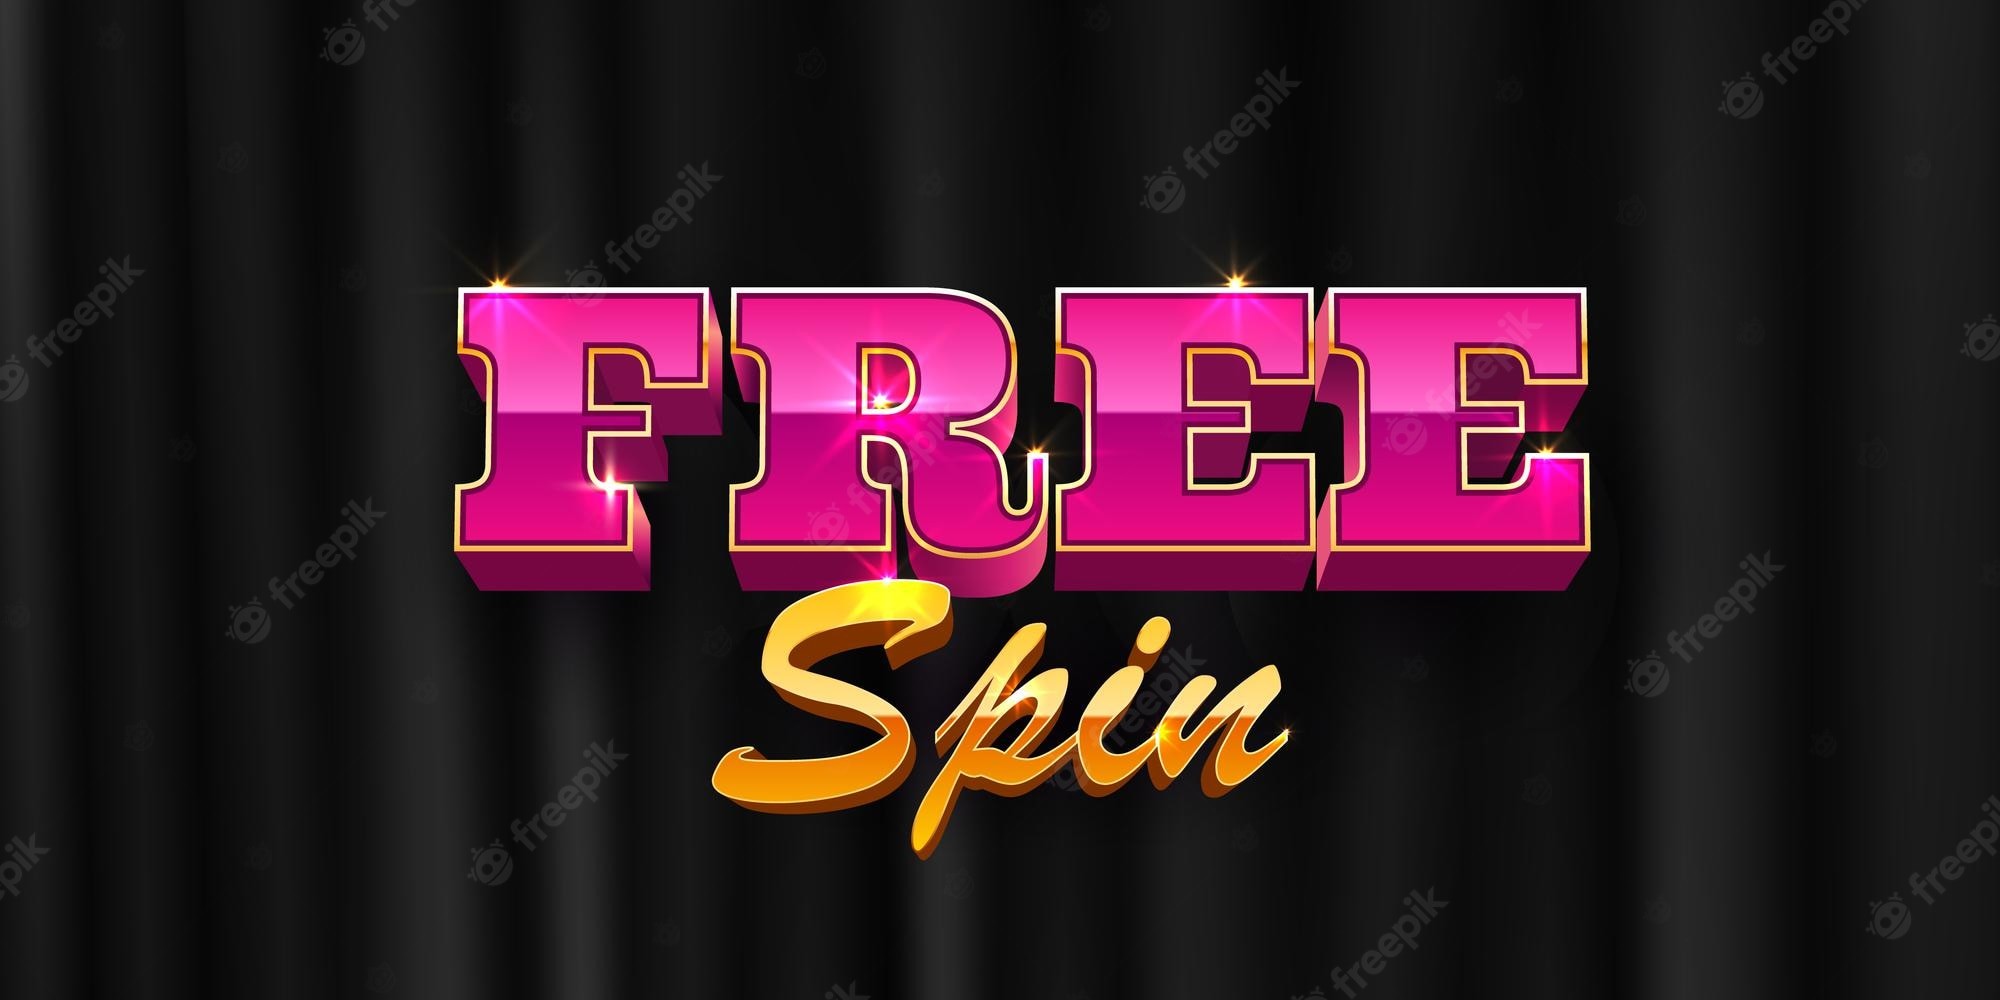 free-spin-banner-sign-with-golden-letters-vector-illustration_3482-6407.jpg